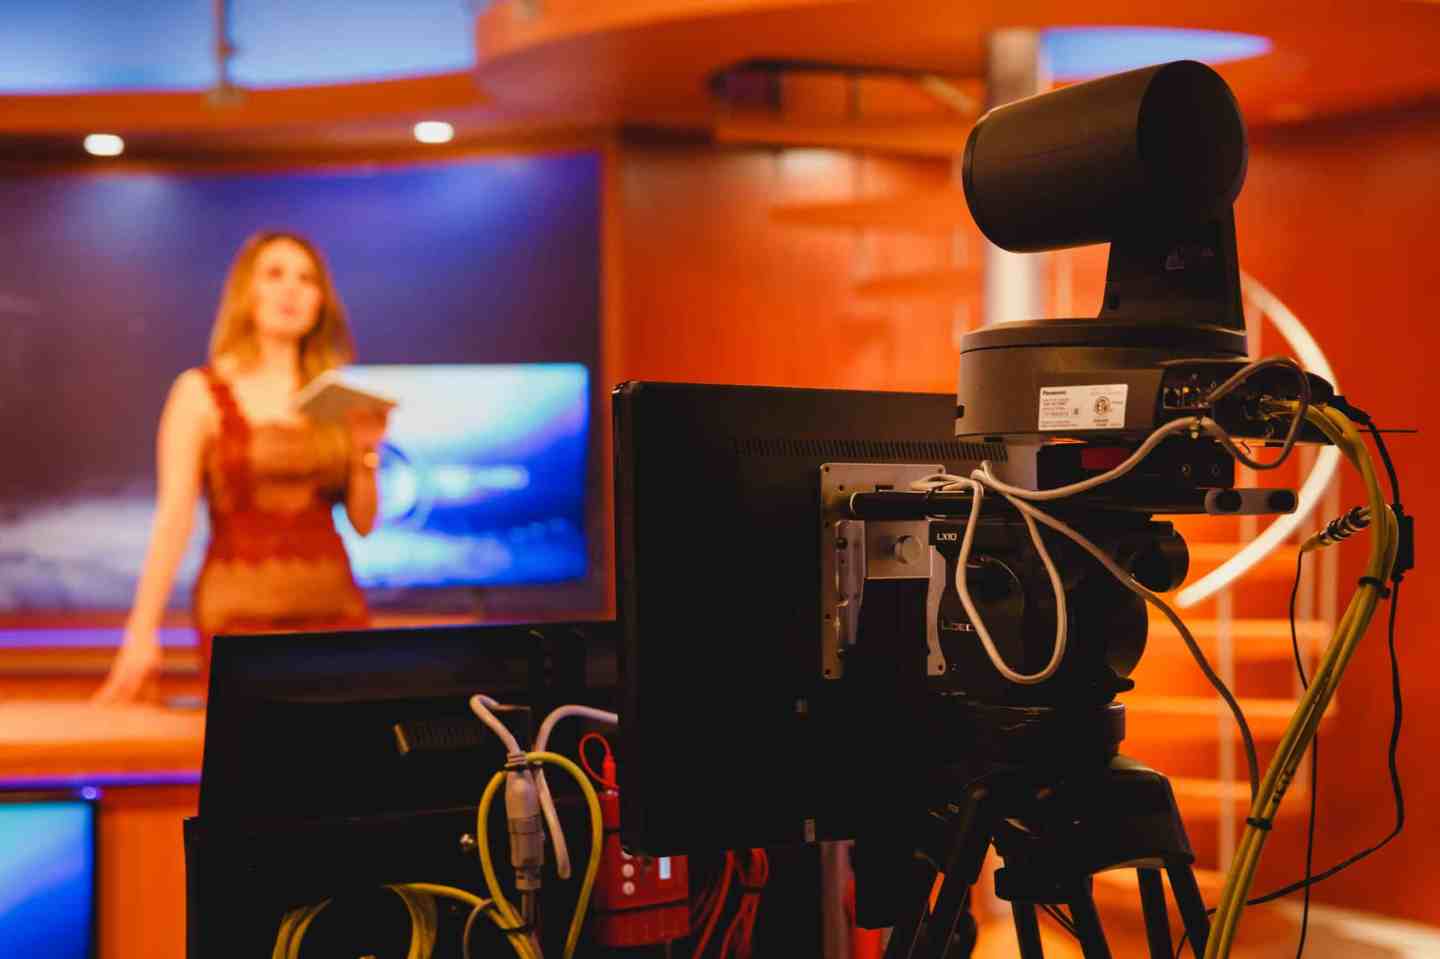 Modern, Affordable TV News Workflow Transforms Small Market Station